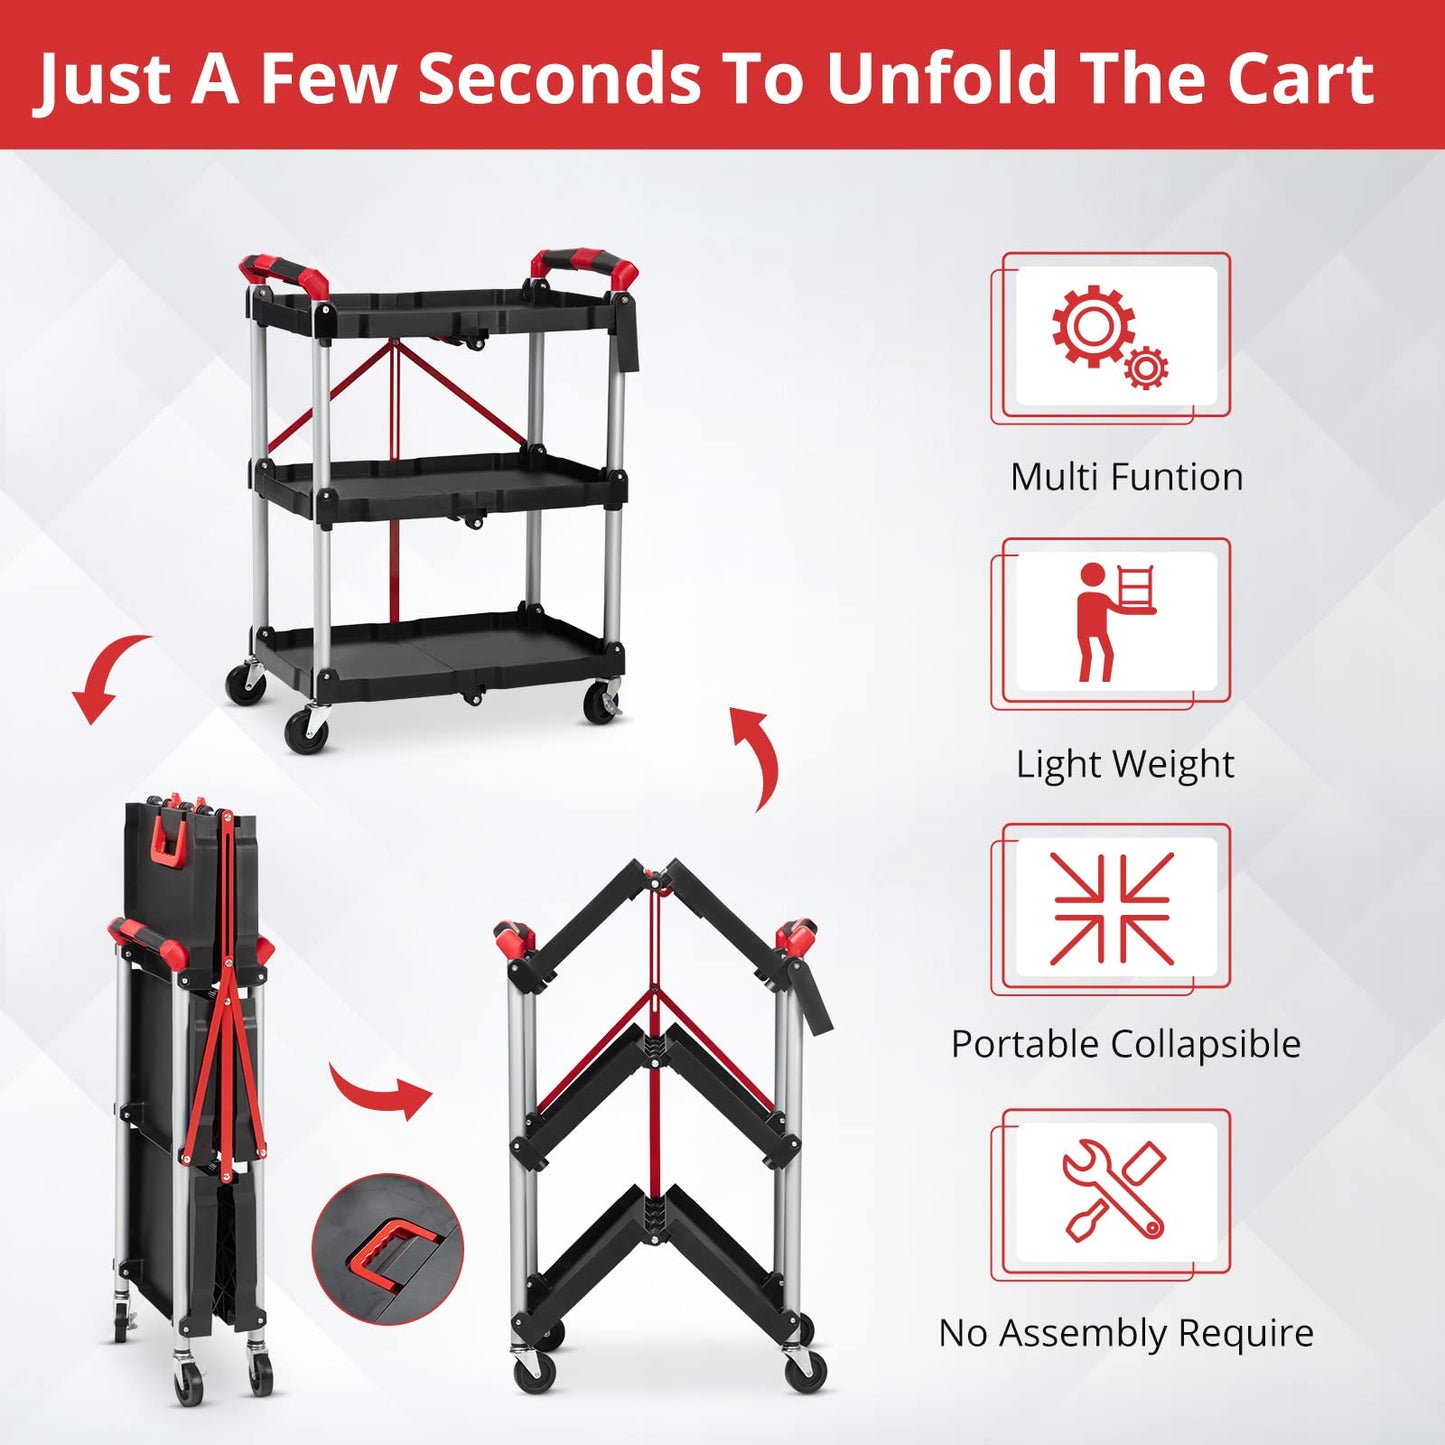 Portable Folding Service Cart,PioneerWorks 3 Tier Collapsible Push Cart,56 lbs Load Capacity/Shelf.Lockable Wheels,Ideal Rolling Tool Storage